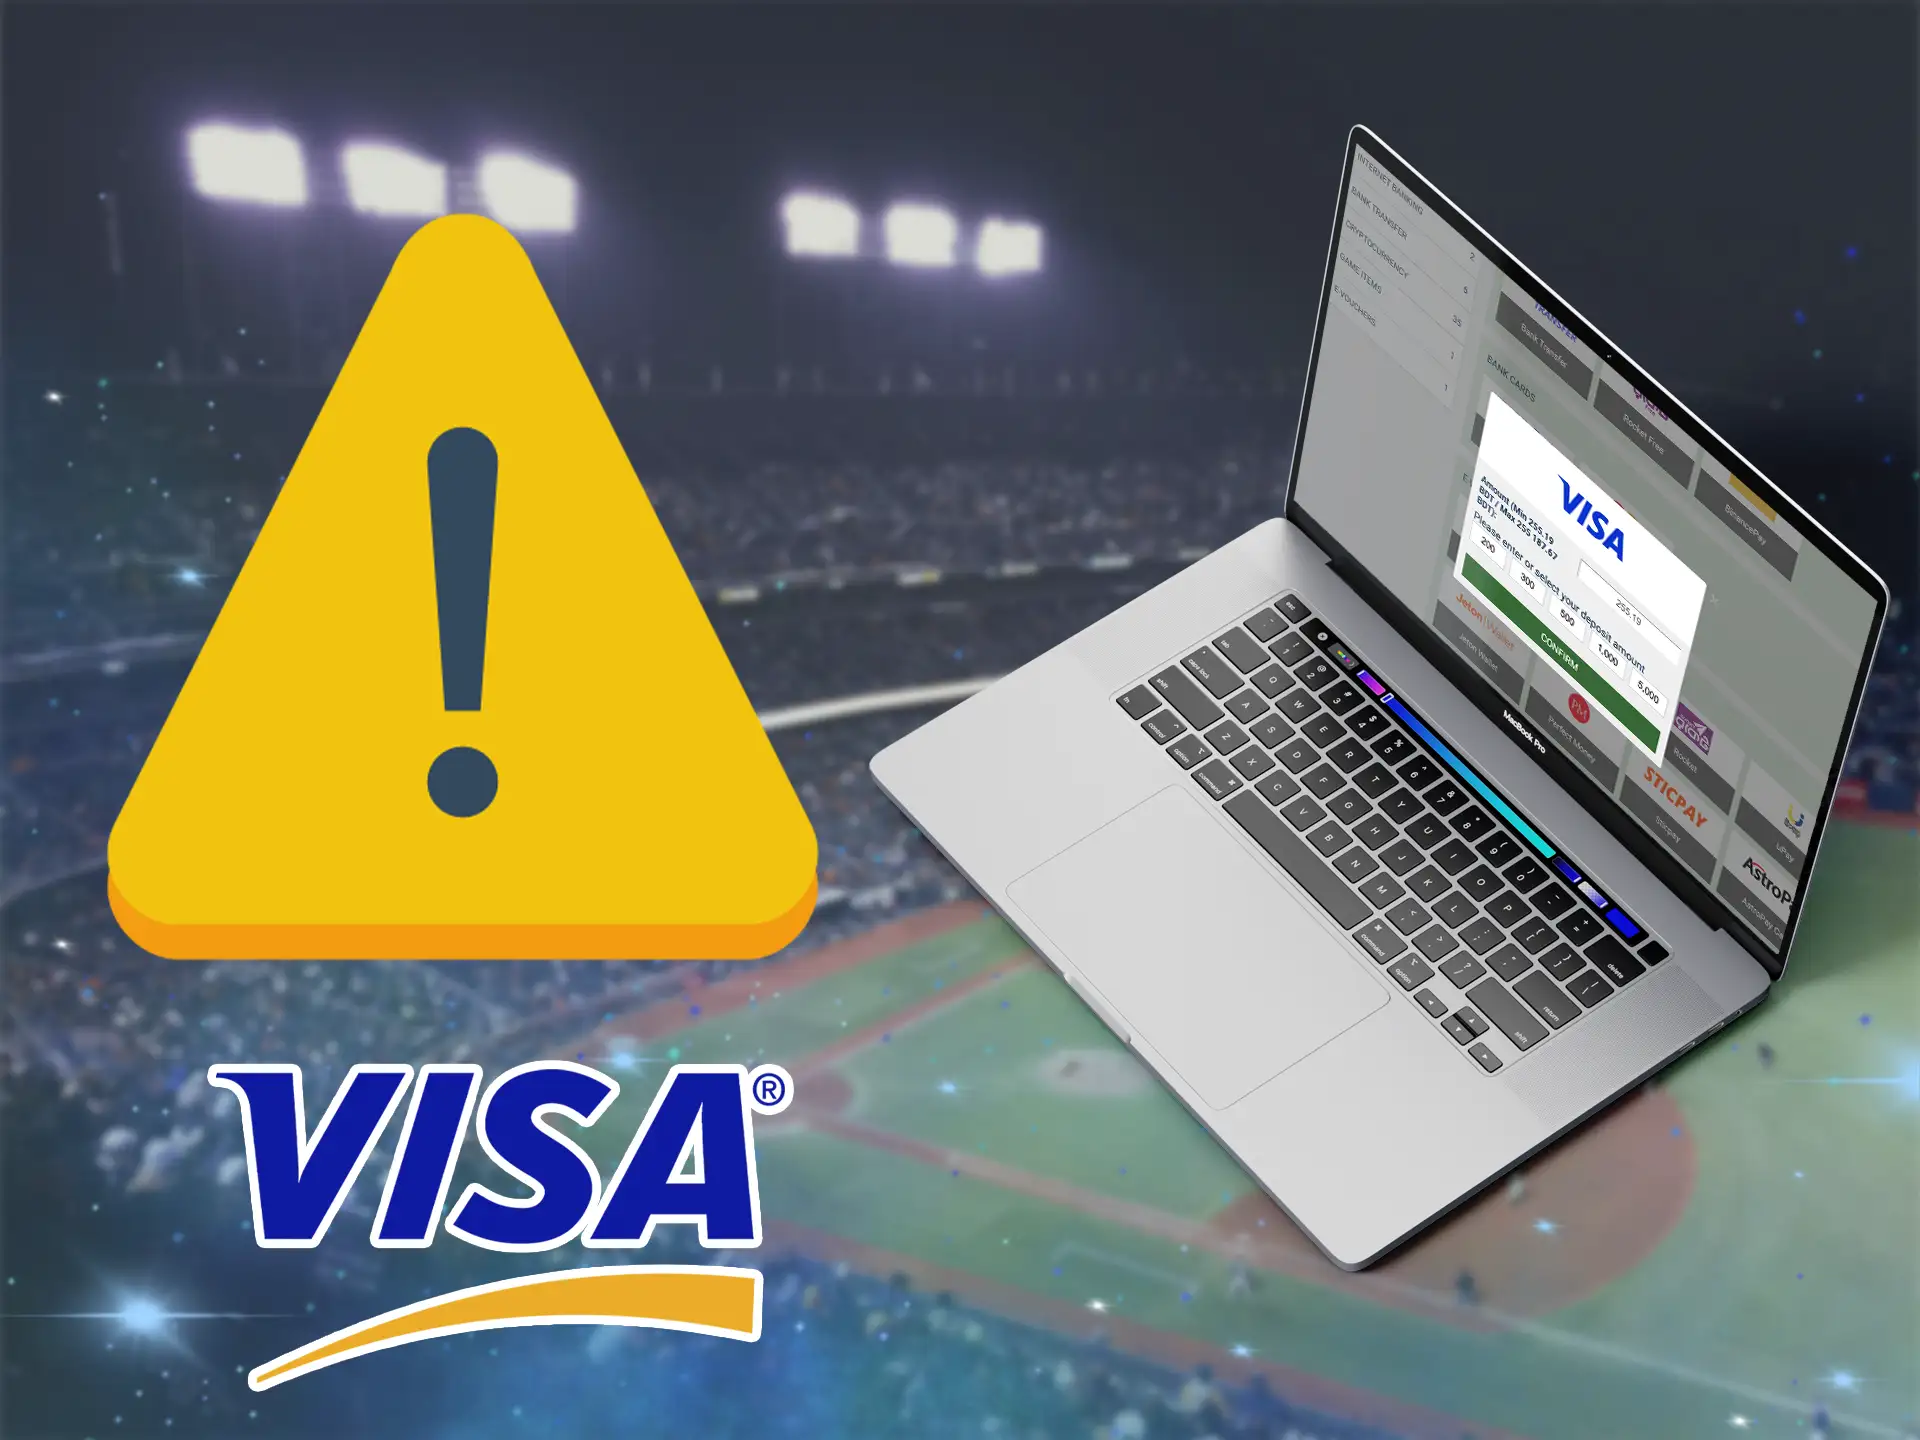 Players from Bangladesh should be aware of all the restrictions associated with withdrawing funds via Visa cards so as not to make unreasonable charges.